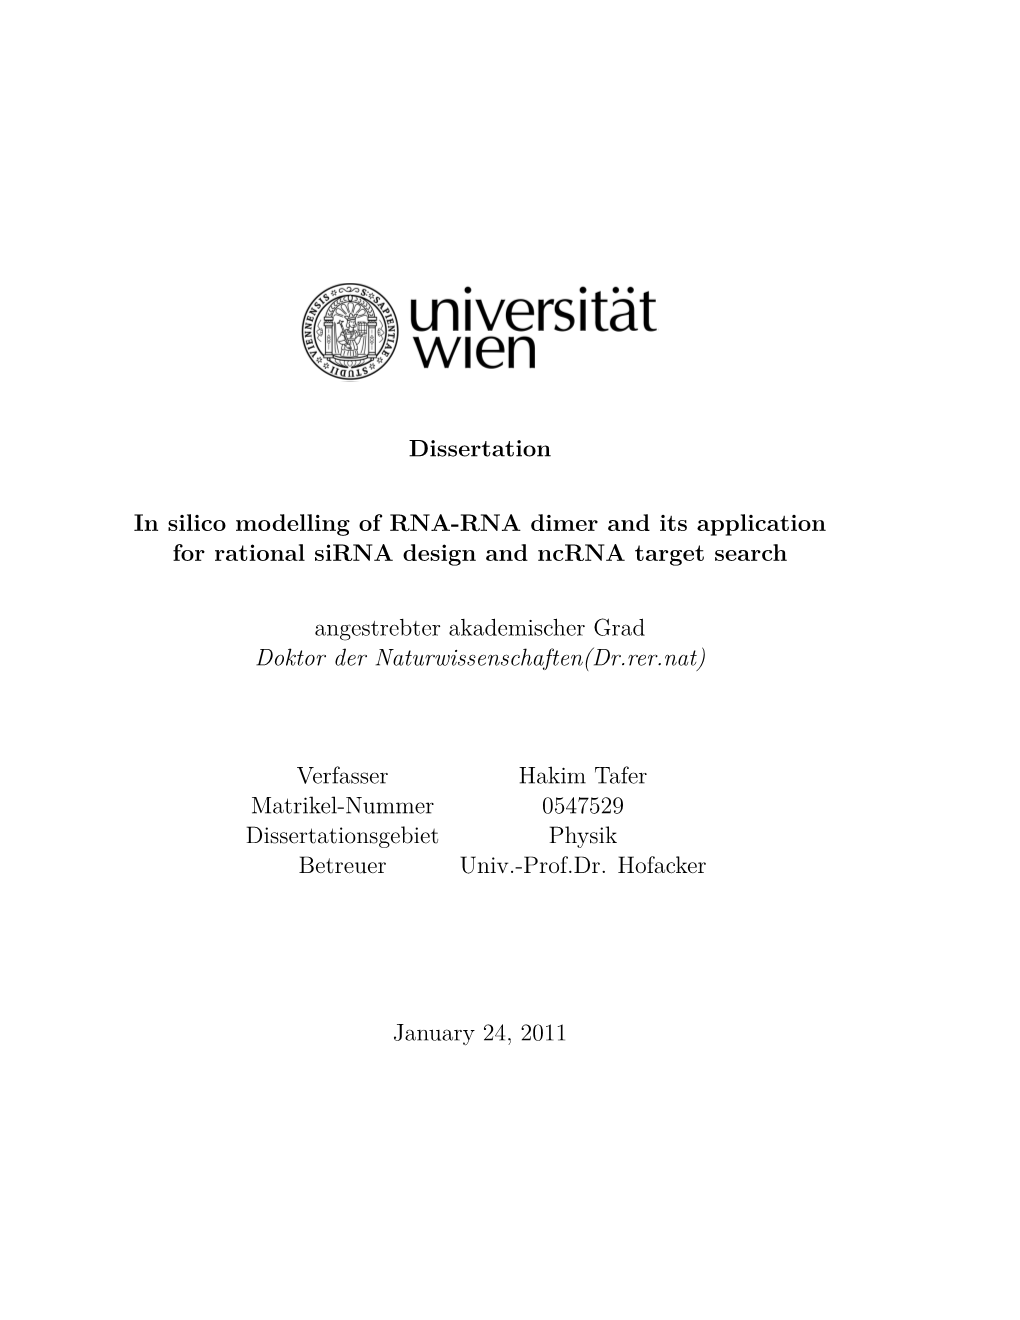 Dissertation in Silico Modelling of RNA-RNA Dimer and Its